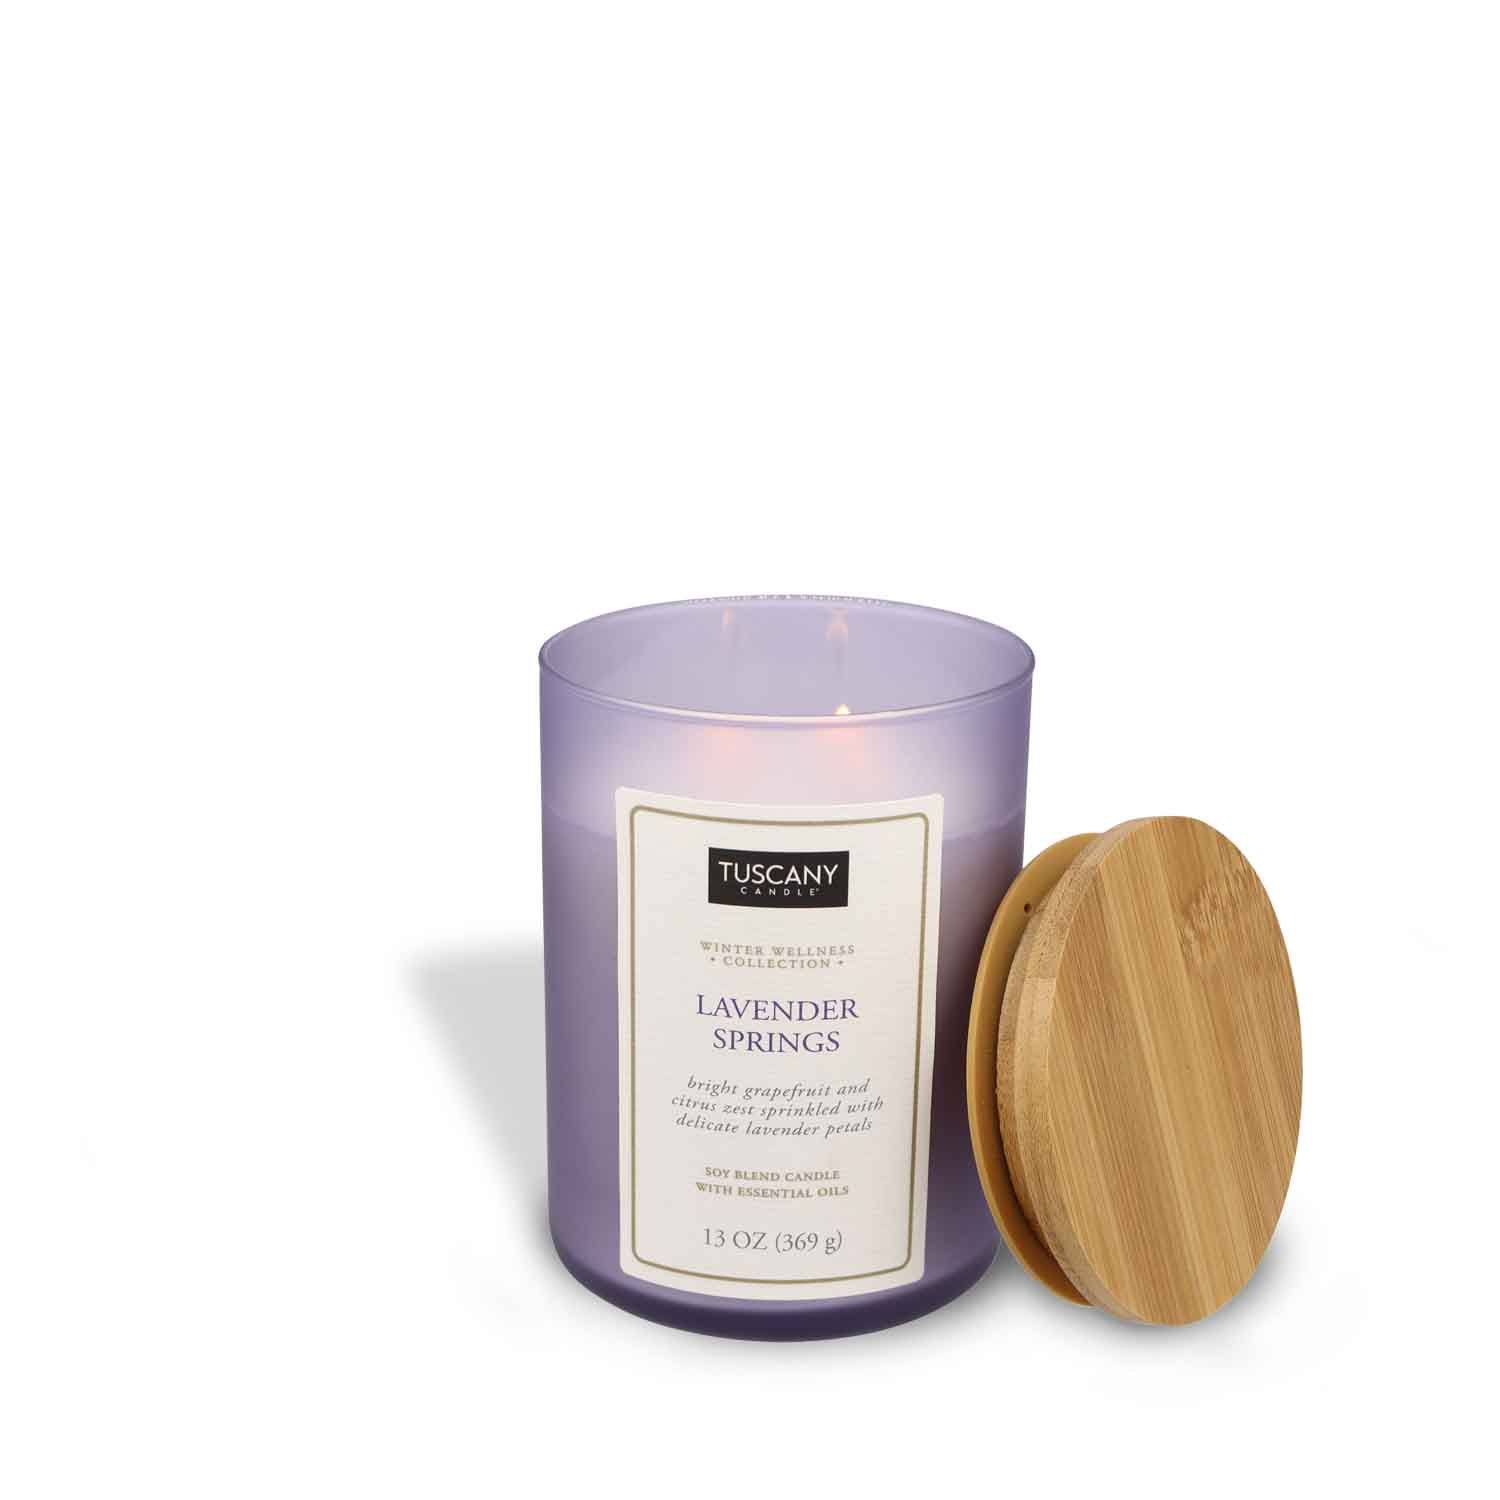 Lavender Springs candle from the Winter Wellness Aromatherapy collection, showcasing pure white wax in a colored matte-finish jar, accented with a chic paper label.